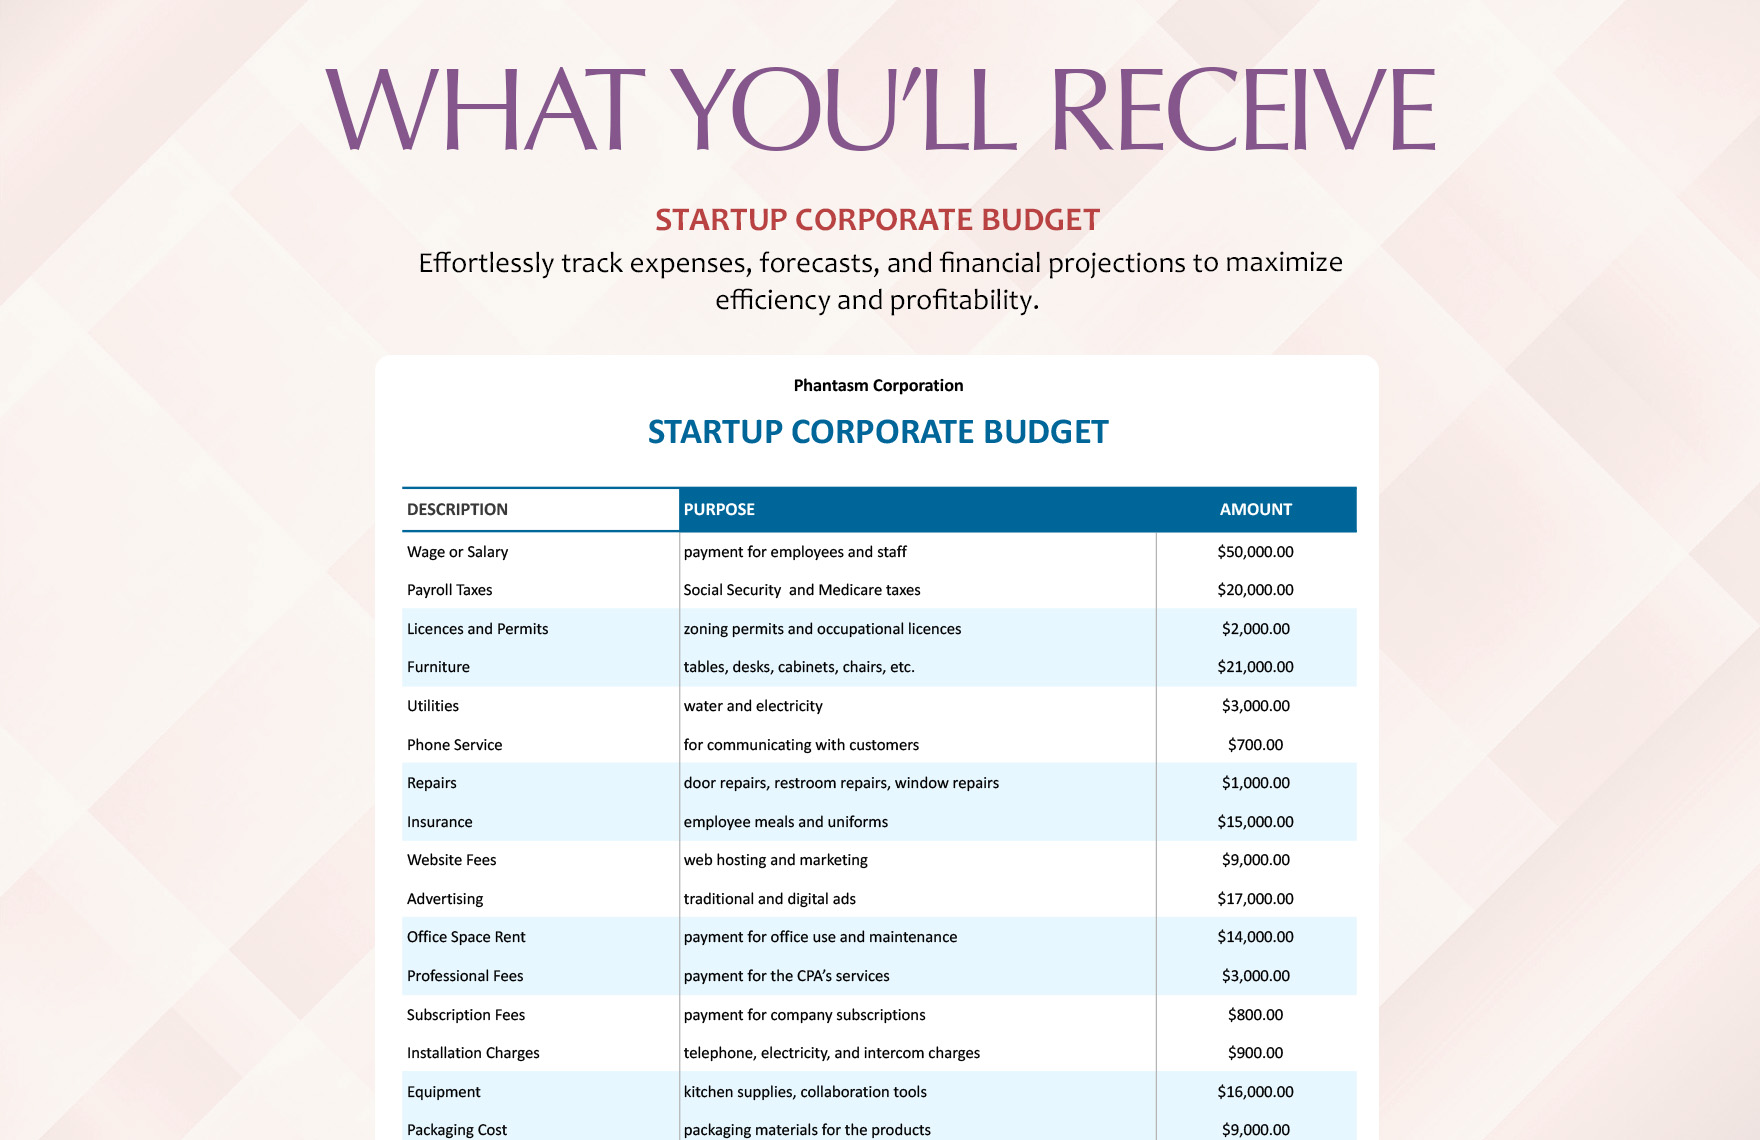 Startup Corporate Budget Template